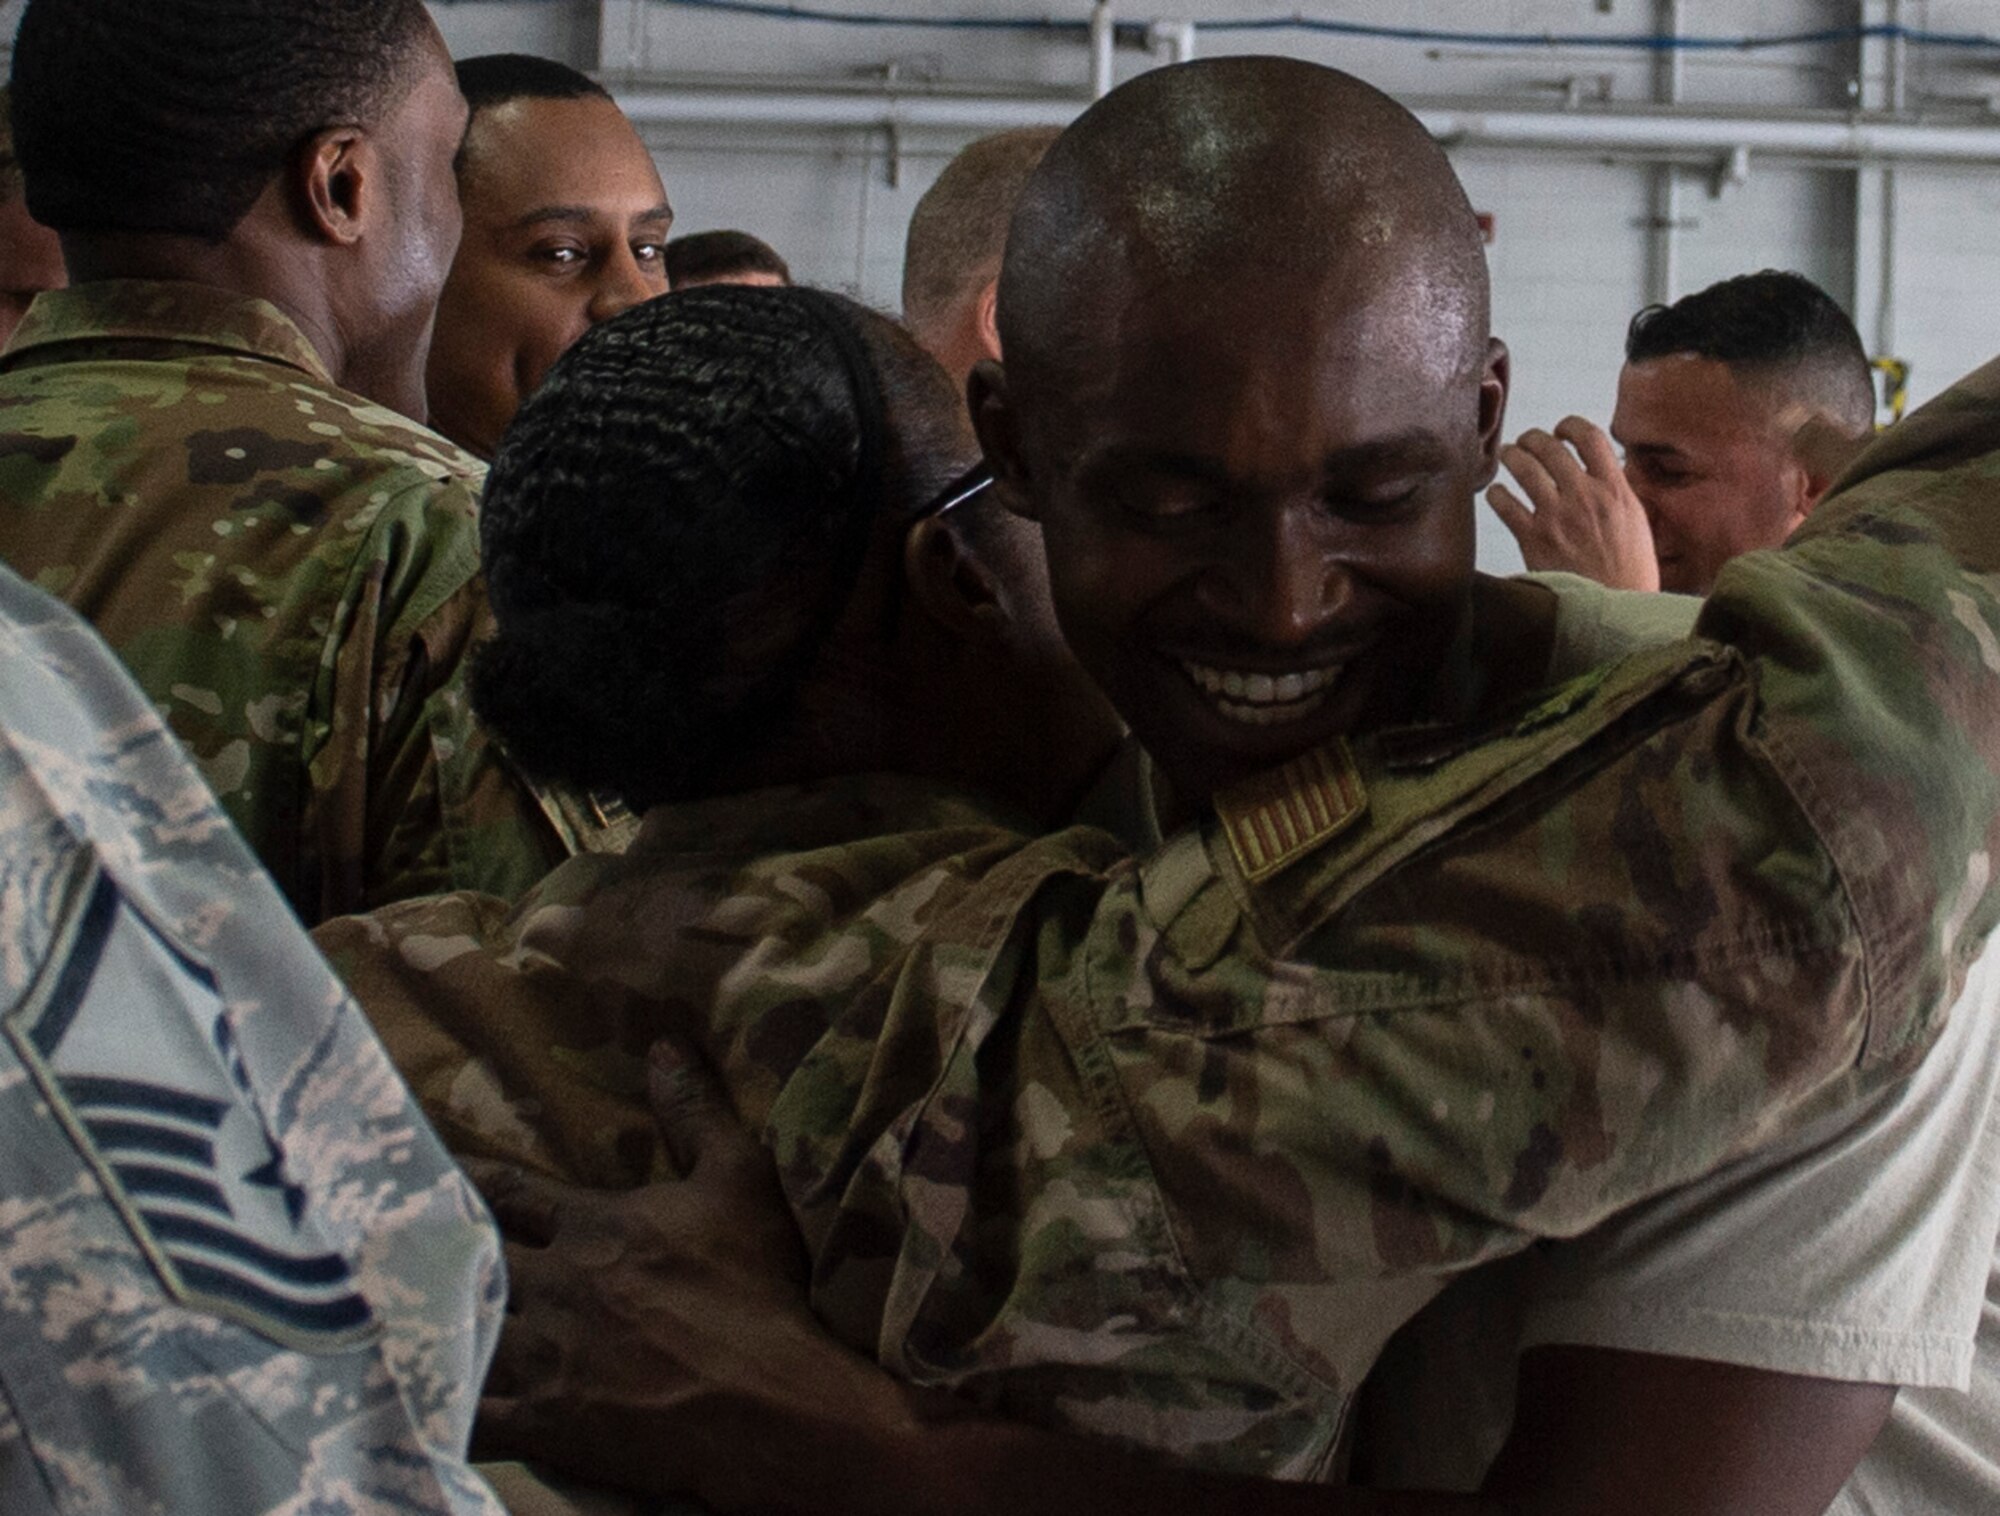 U.S. Air Force Senior Airman Josef Thompson, 20th Aircraft Maintenance Squadron, 77th Aircraft Maintenance Unit load crew member, embraces a wingman following the completion of the Load Crew of the Year competition at Shaw Air Force Base, S.C., March 1, 2019.